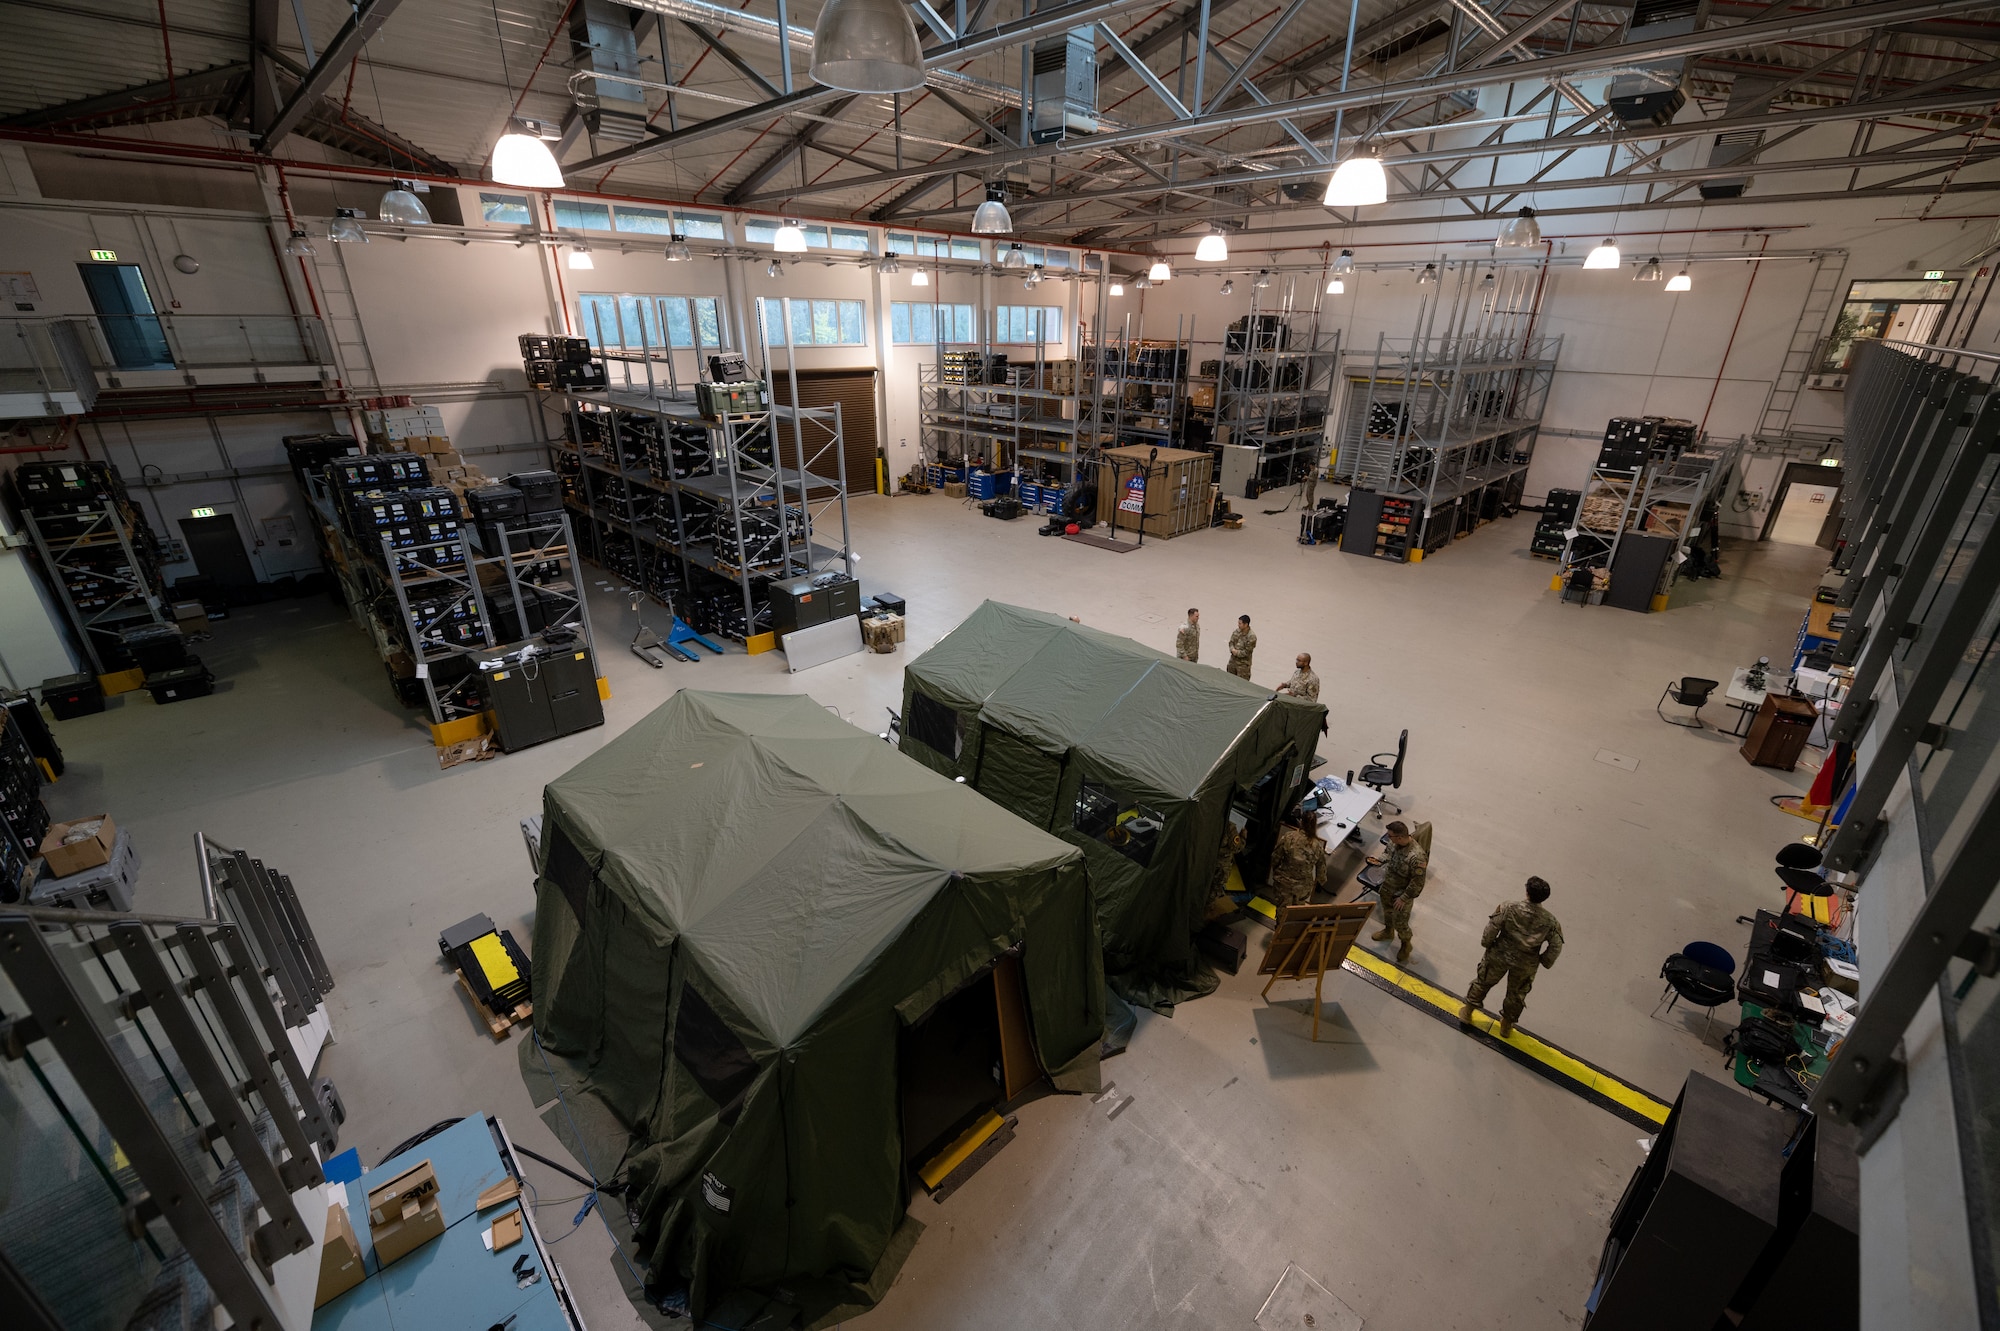 Military personnel assigned to the 527th/26th Space Aggressor Squadron and 2d Multi-Domain Task Force provide real-time monitoring of health and wellness for military satellites during Exercise HEAVY RAIN 23, Nov. 16, 2023 at Ramstein Air Base, Germany. HEAVY RAIN is a U.S. Air Forces in Europe-led command and control exercise that tests and evaluates communication and data-sharing capabilities among the joint force, NATO Allies and partners. (U.S. Air Force Photo by Senior Airman Edgar Grimaldo)